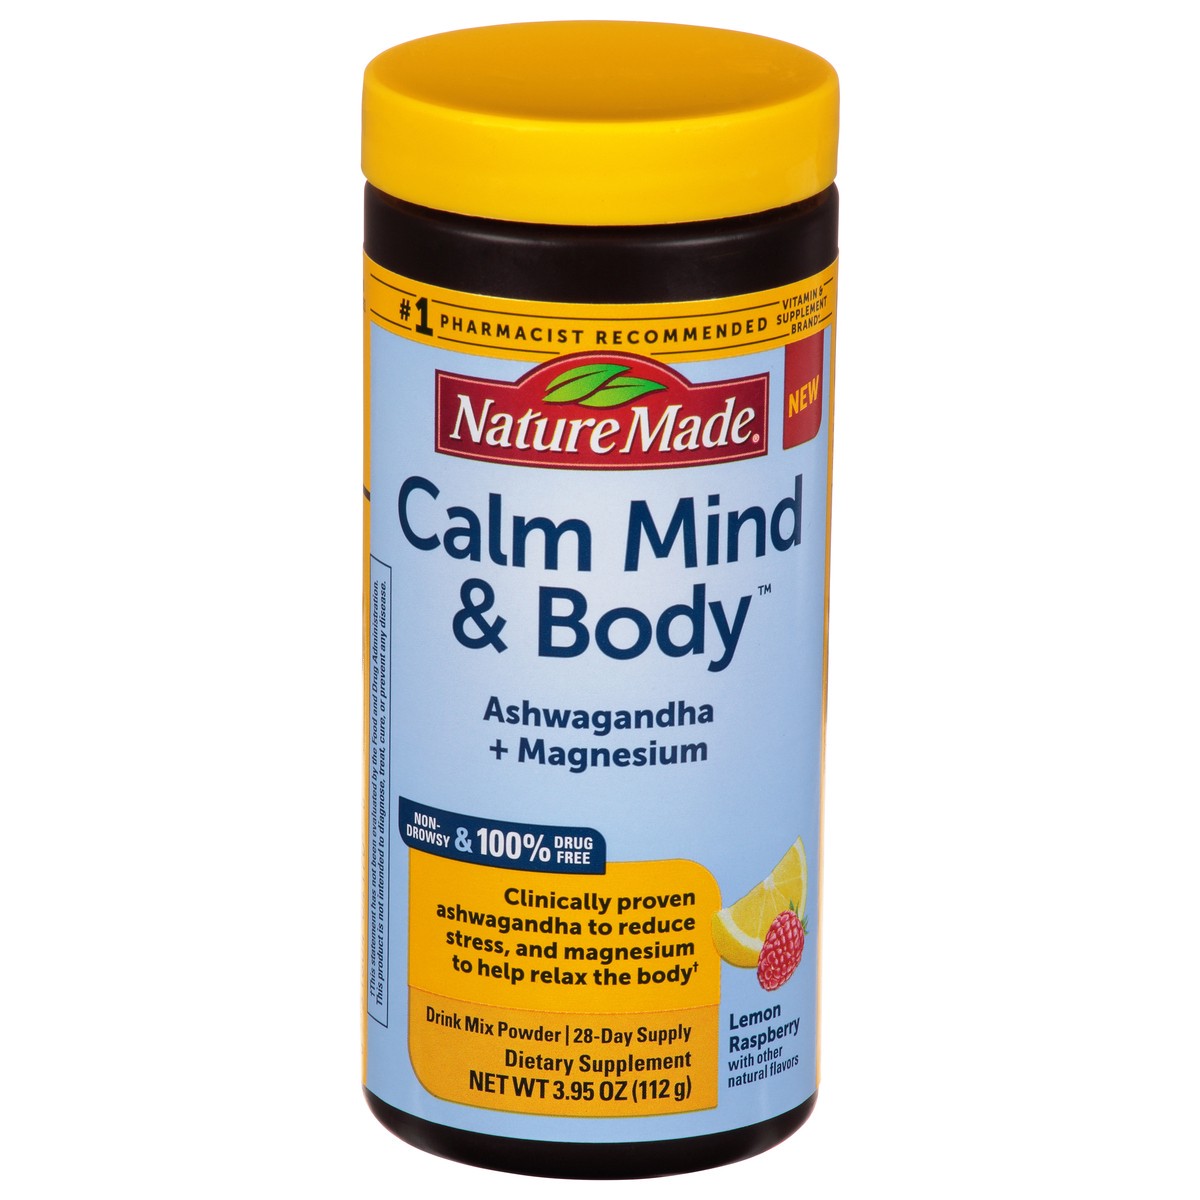 slide 7 of 10, Nature Made Calm Mind & Body Drink Mix, Ashwagandha to Reduce Stress, Magnesium to Help Relax Your Body, Non-Drowsy, 100% Drug-Free, Lemon Raspberry, 3.95 oz, 95 oz